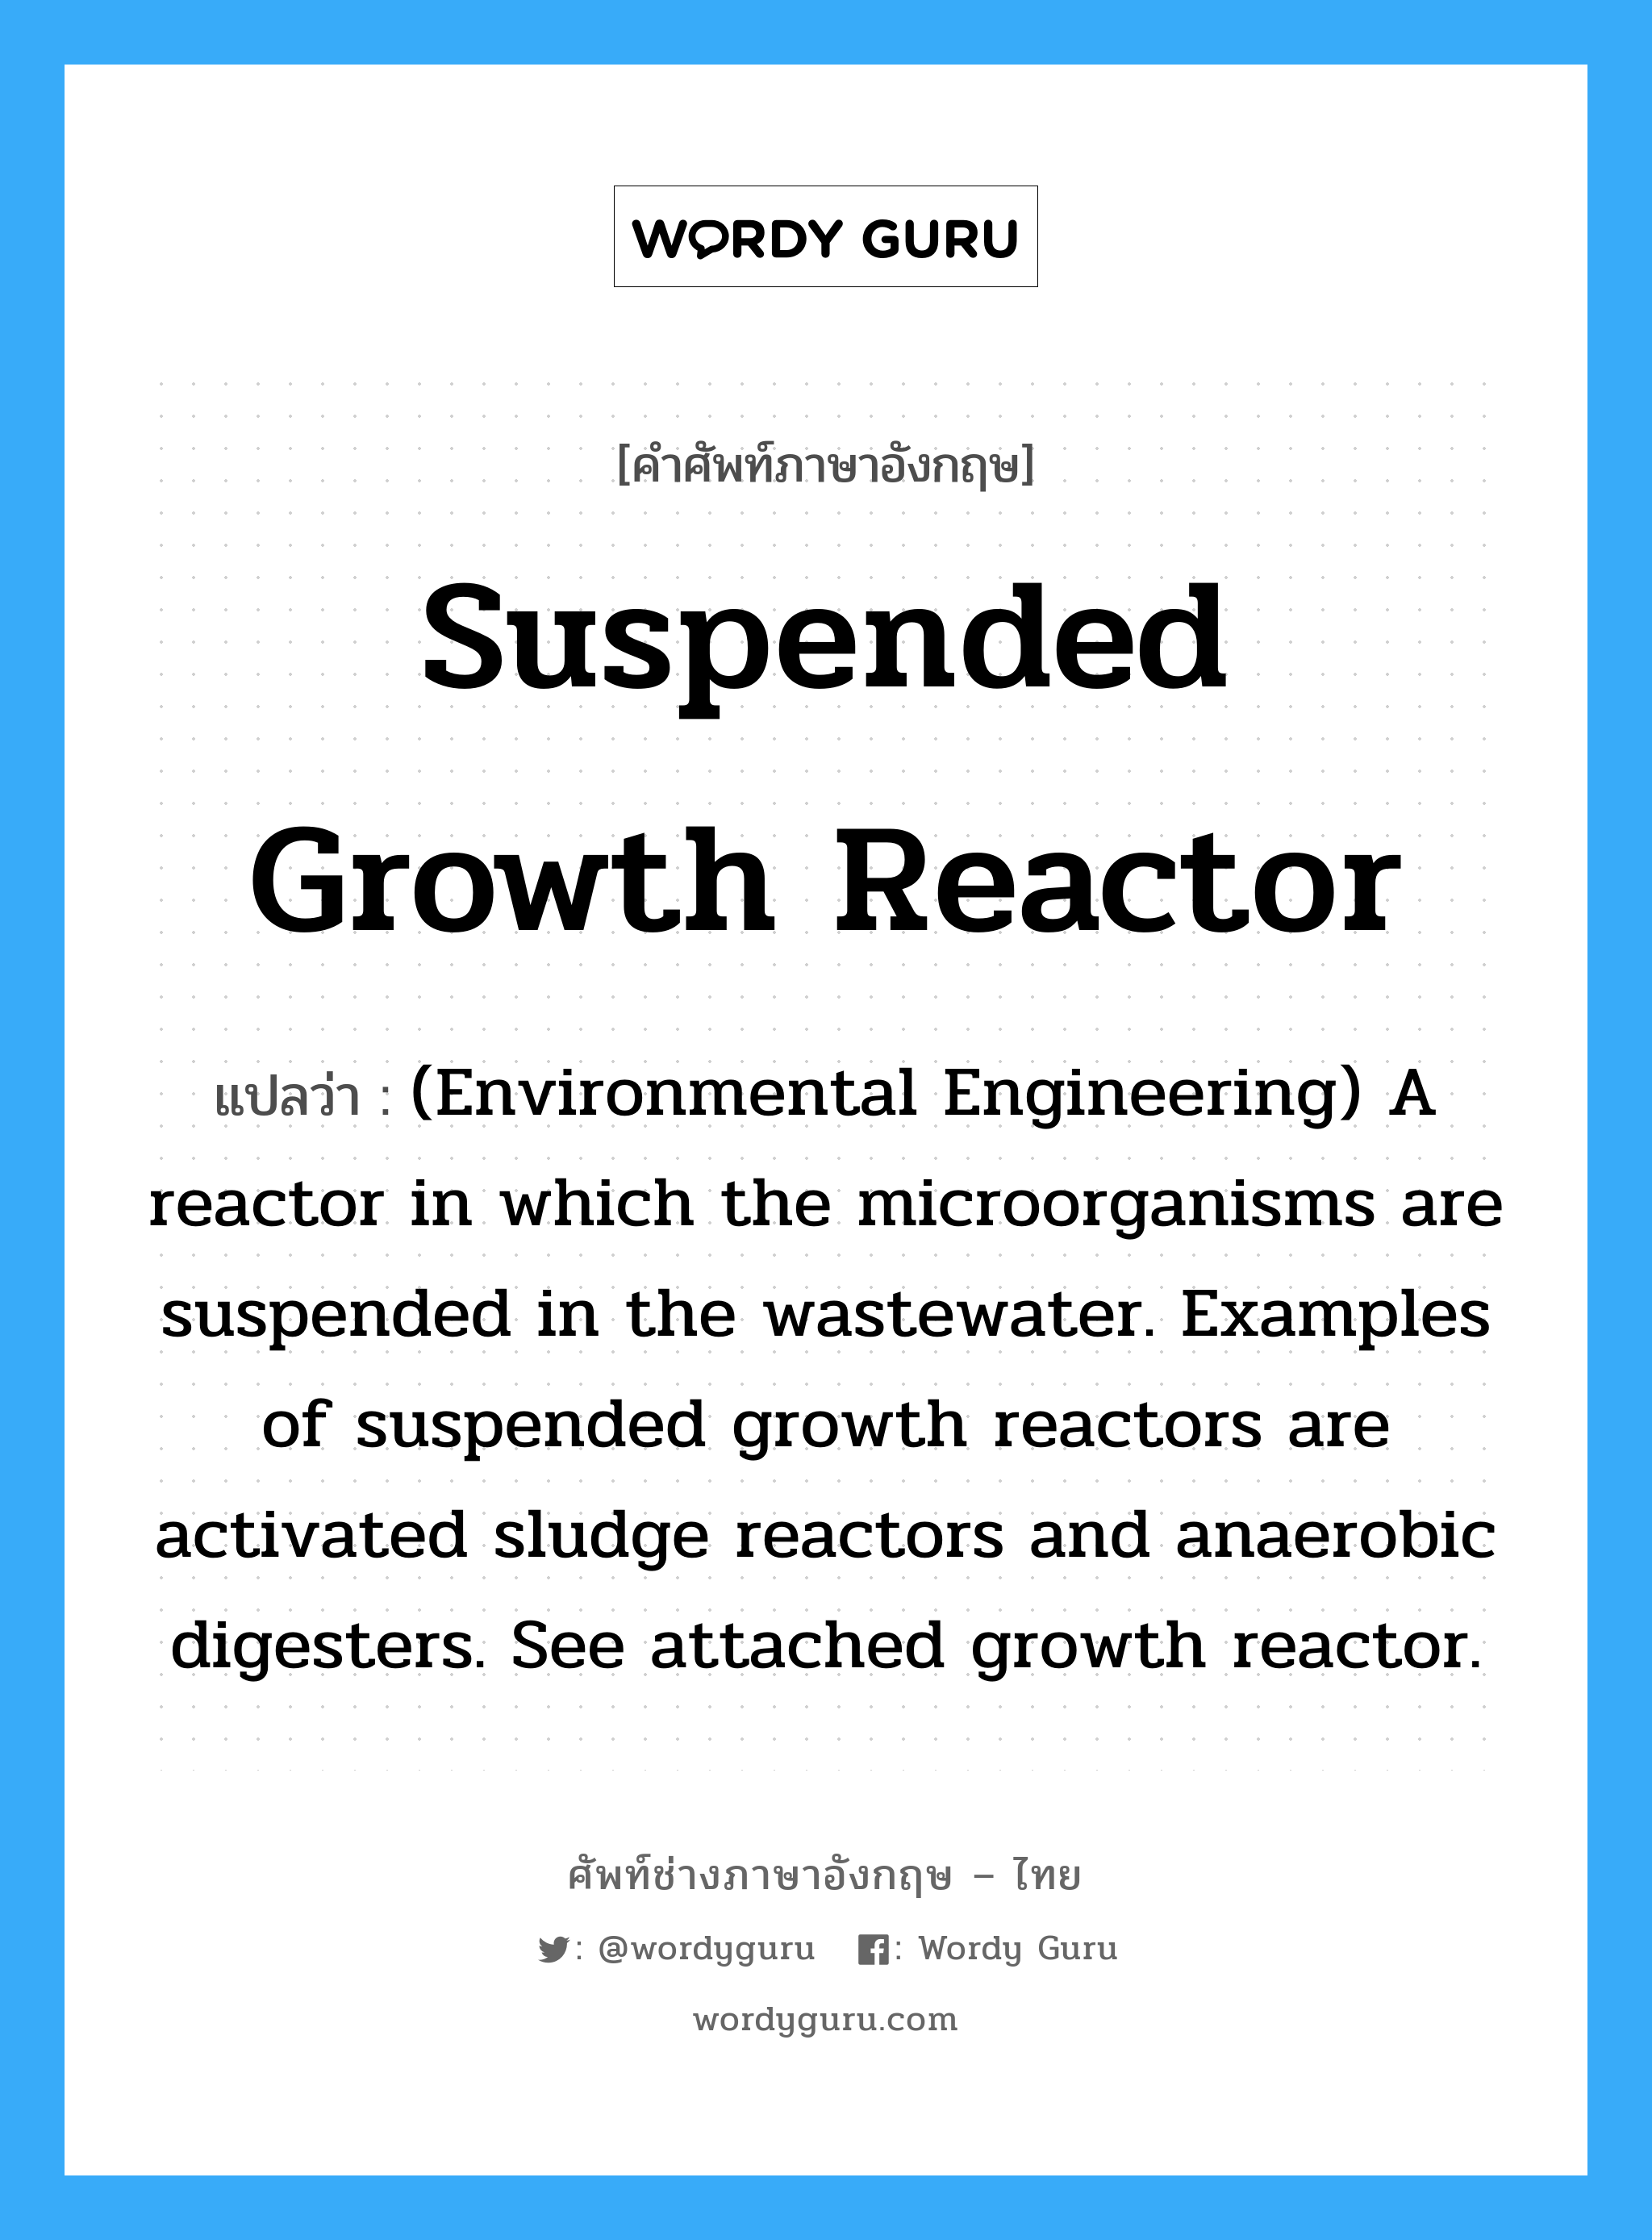 (Environmental Engineering) A reactor in which the microorganisms are suspended in the wastewater. Examples of suspended growth reactors are activated sludge reactors and anaerobic digesters. See attached growth reactor. ภาษาอังกฤษ?, คำศัพท์ช่างภาษาอังกฤษ - ไทย (Environmental Engineering) A reactor in which the microorganisms are suspended in the wastewater. Examples of suspended growth reactors are activated sludge reactors and anaerobic digesters. See attached growth reactor. คำศัพท์ภาษาอังกฤษ (Environmental Engineering) A reactor in which the microorganisms are suspended in the wastewater. Examples of suspended growth reactors are activated sludge reactors and anaerobic digesters. See attached growth reactor. แปลว่า Suspended growth reactor